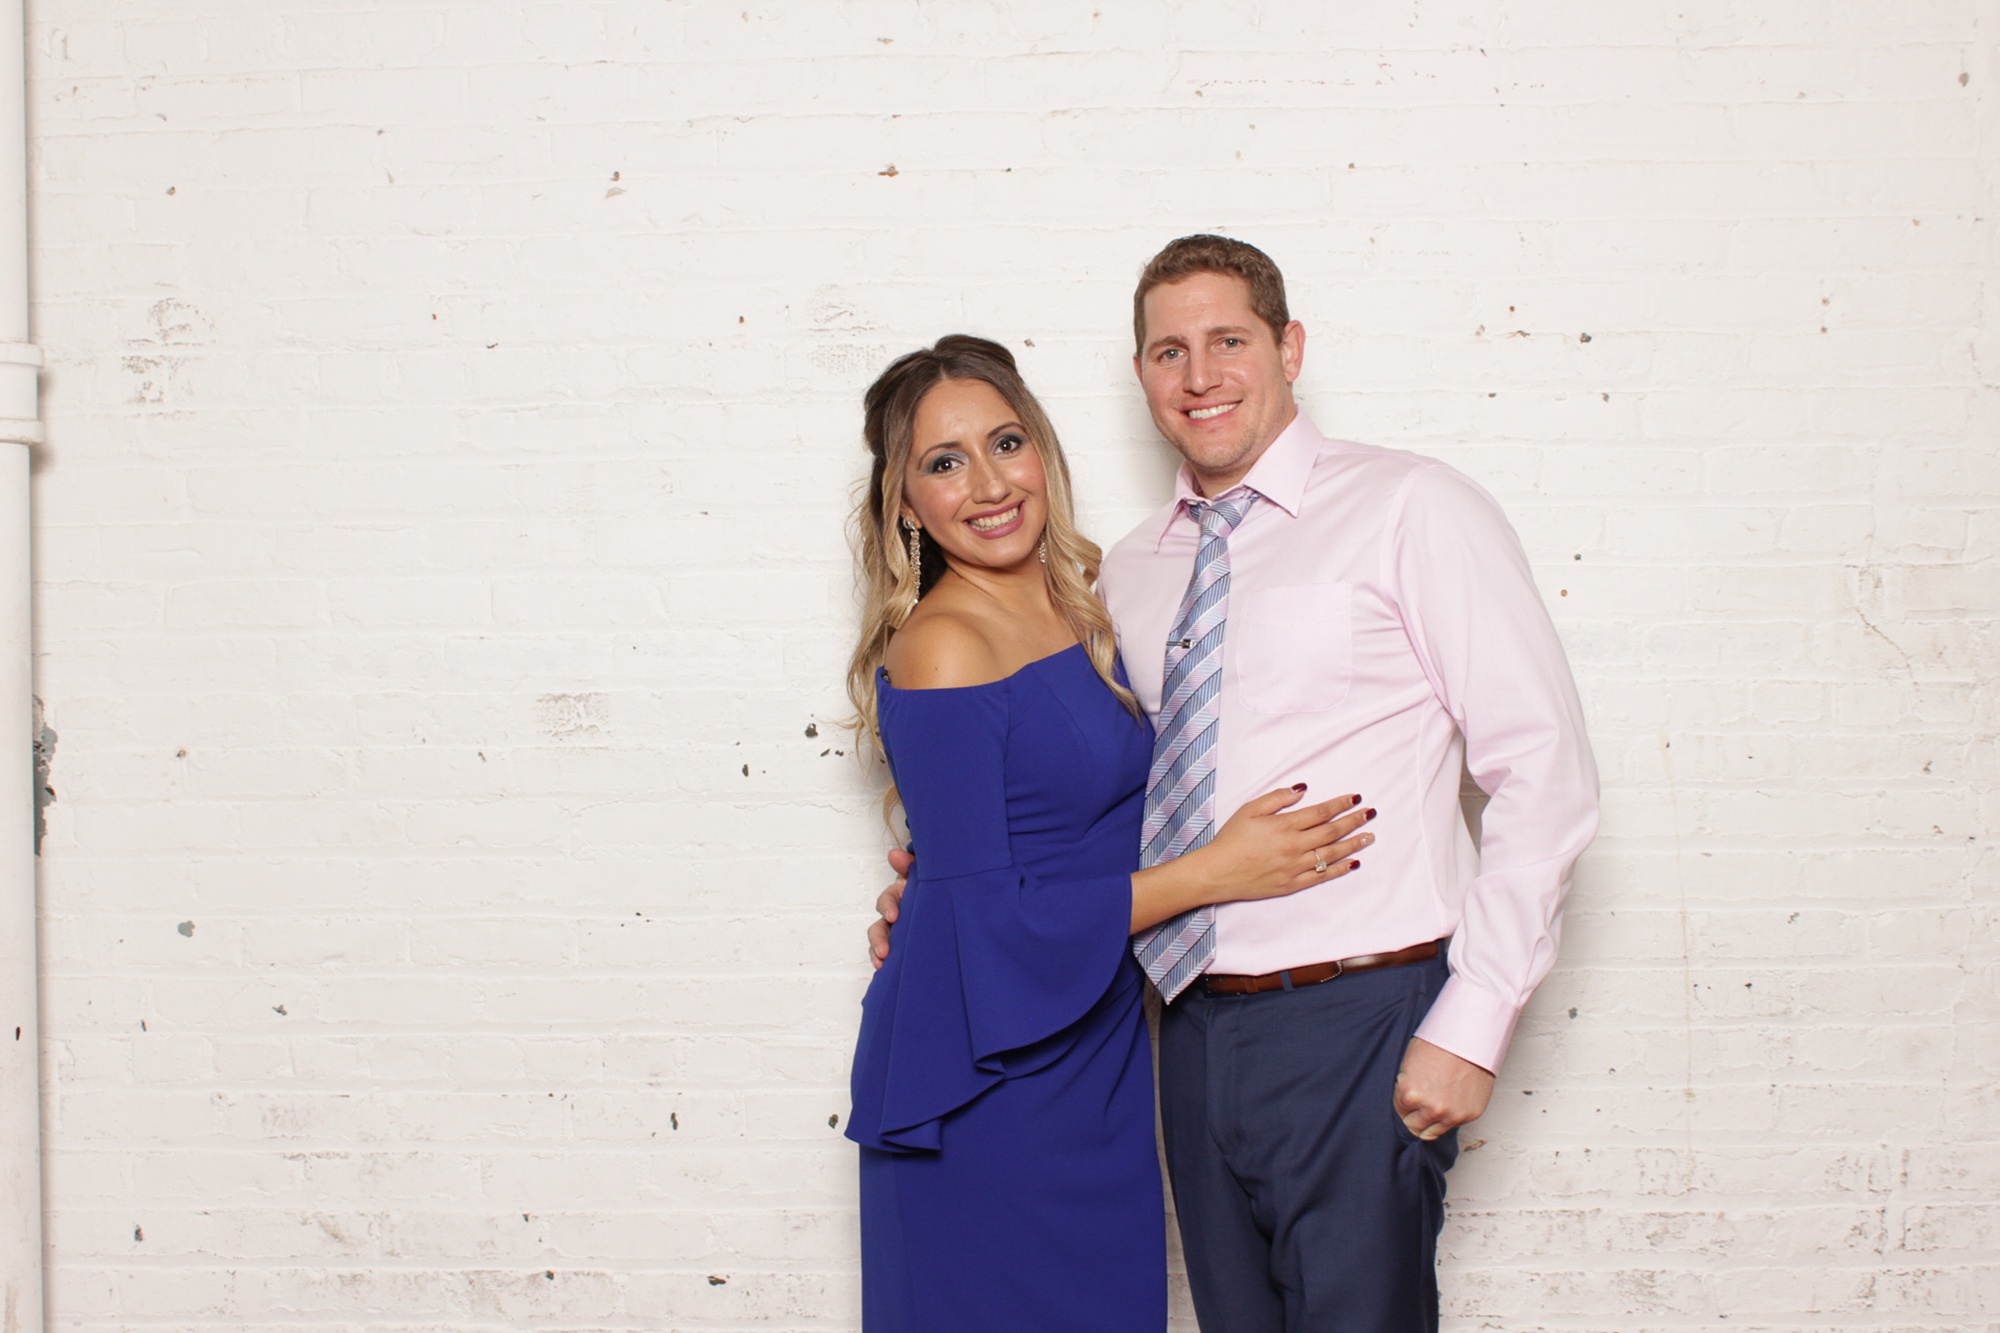 dates pose together during Art Factory Studios Photo Booth